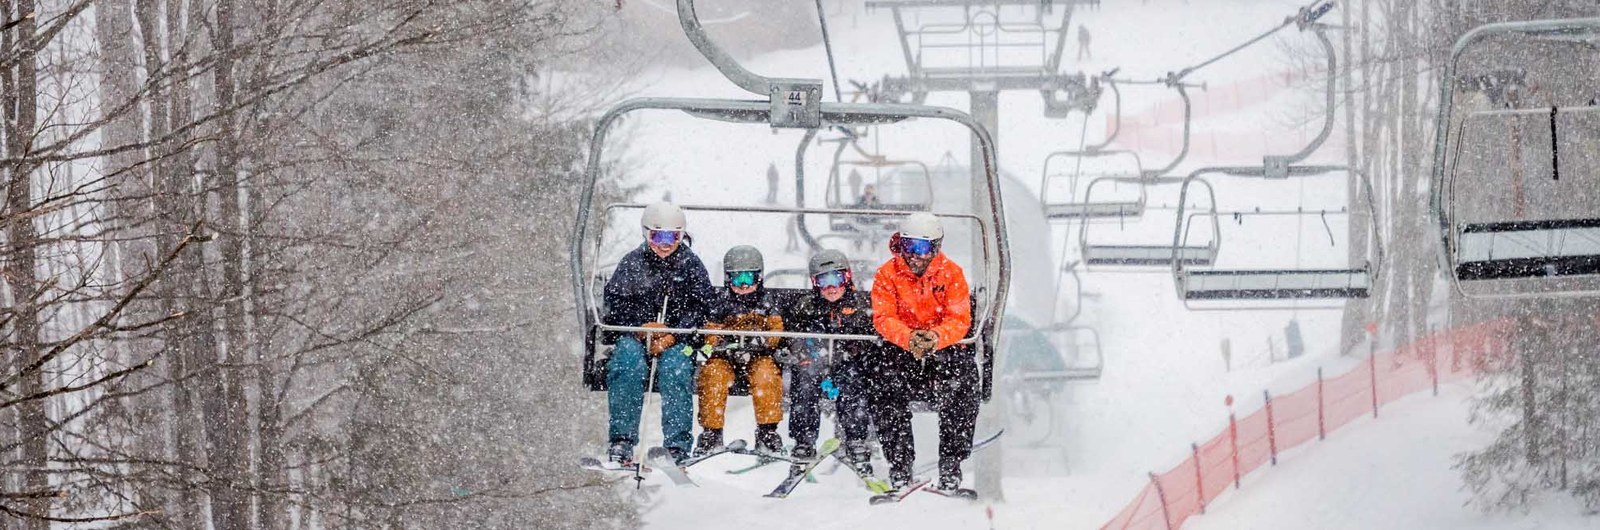 Two parents and two children ride up the Yodeler lift.